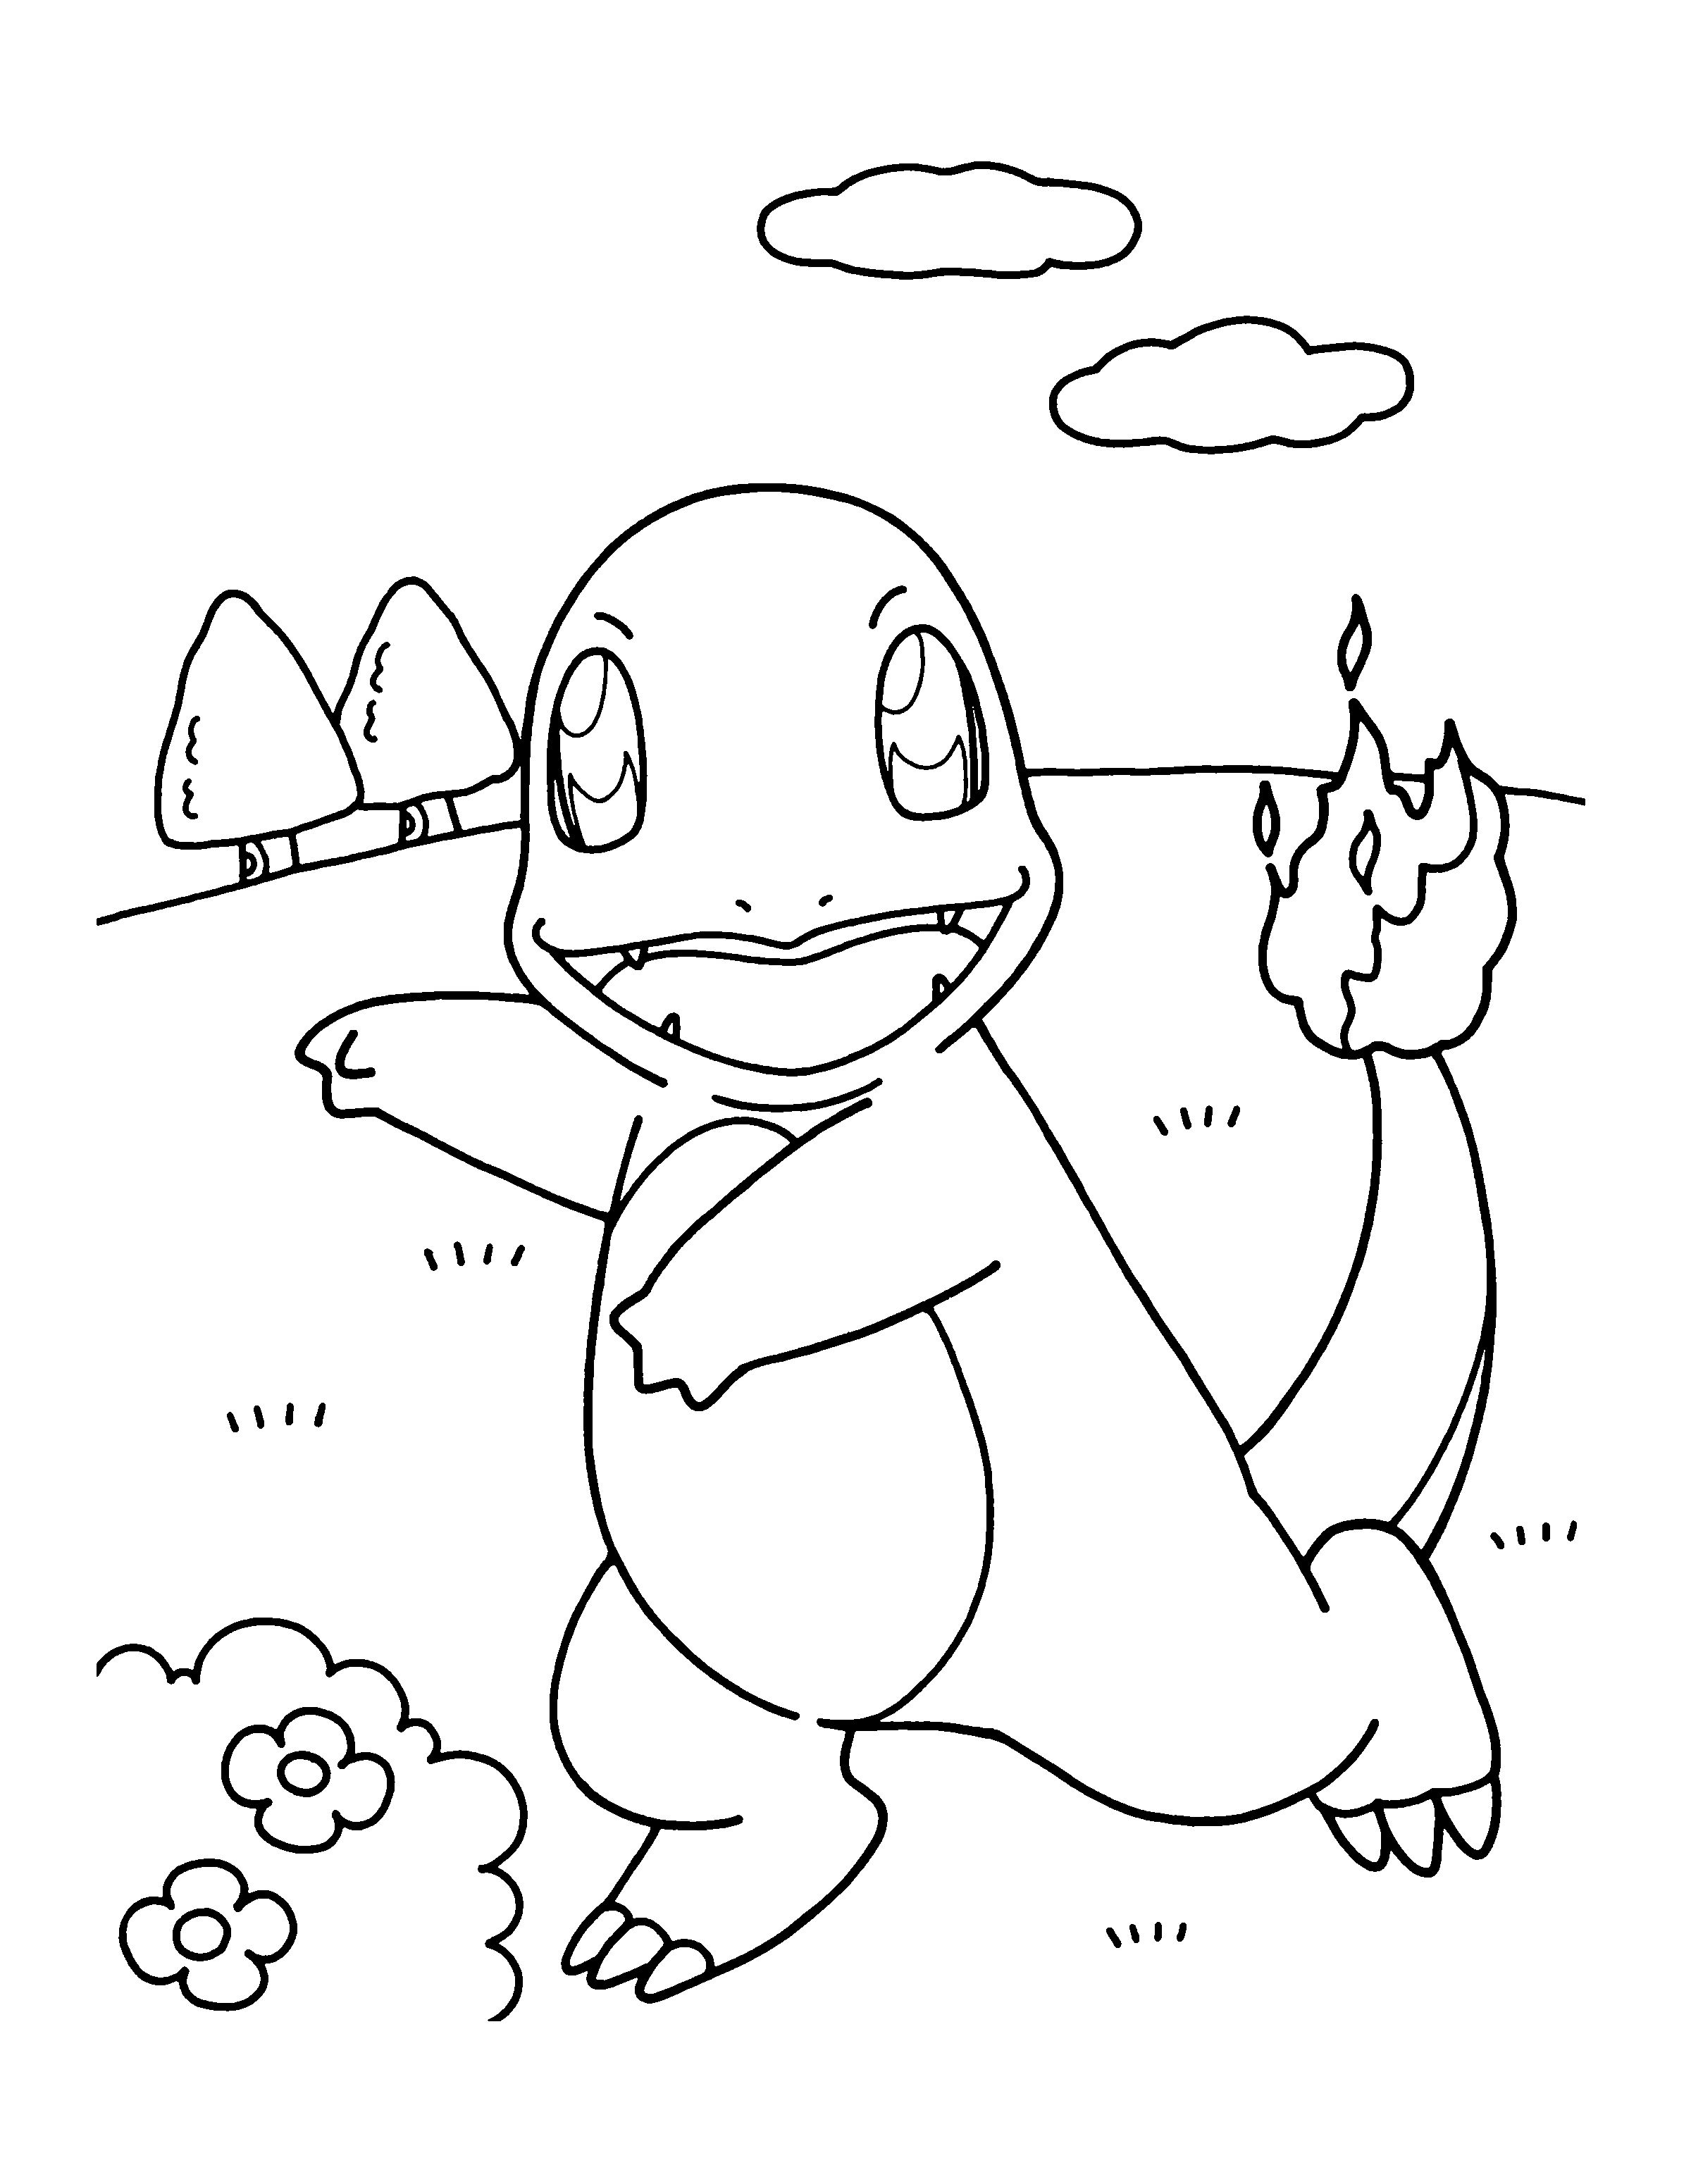 Free Pokemon Coloring Pages , Download Free Pokemon Coloring Pages png